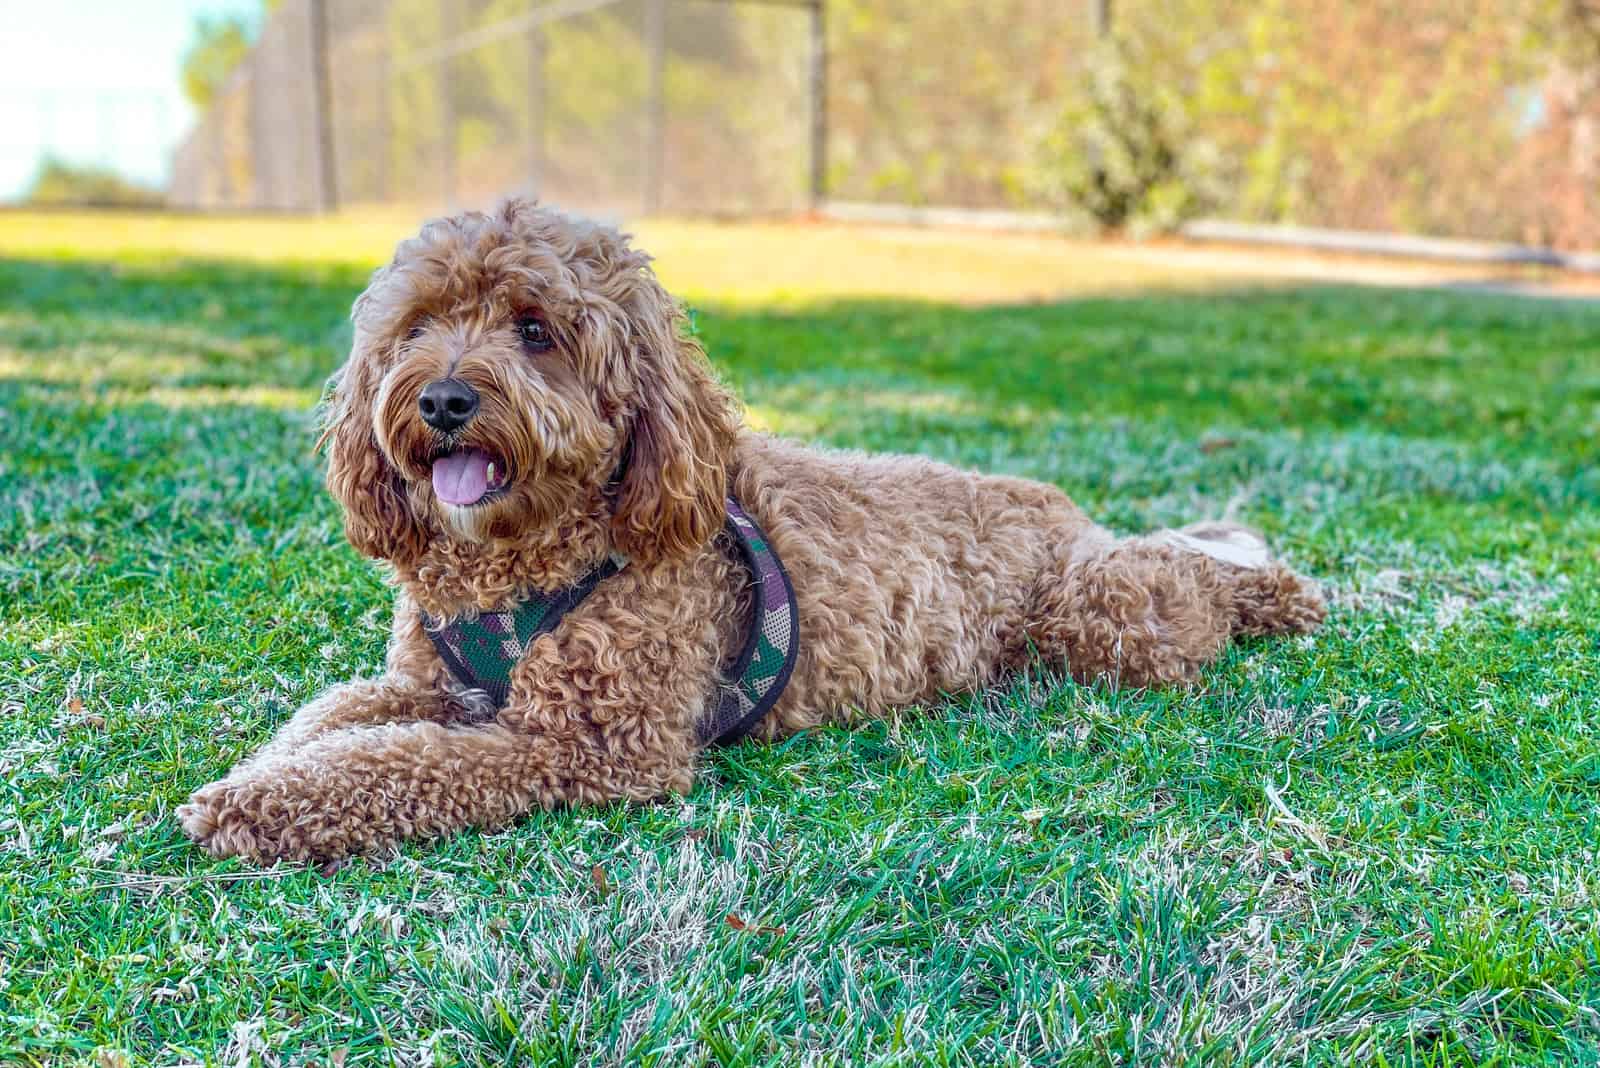 Cavapoo outside on grass looking into distance